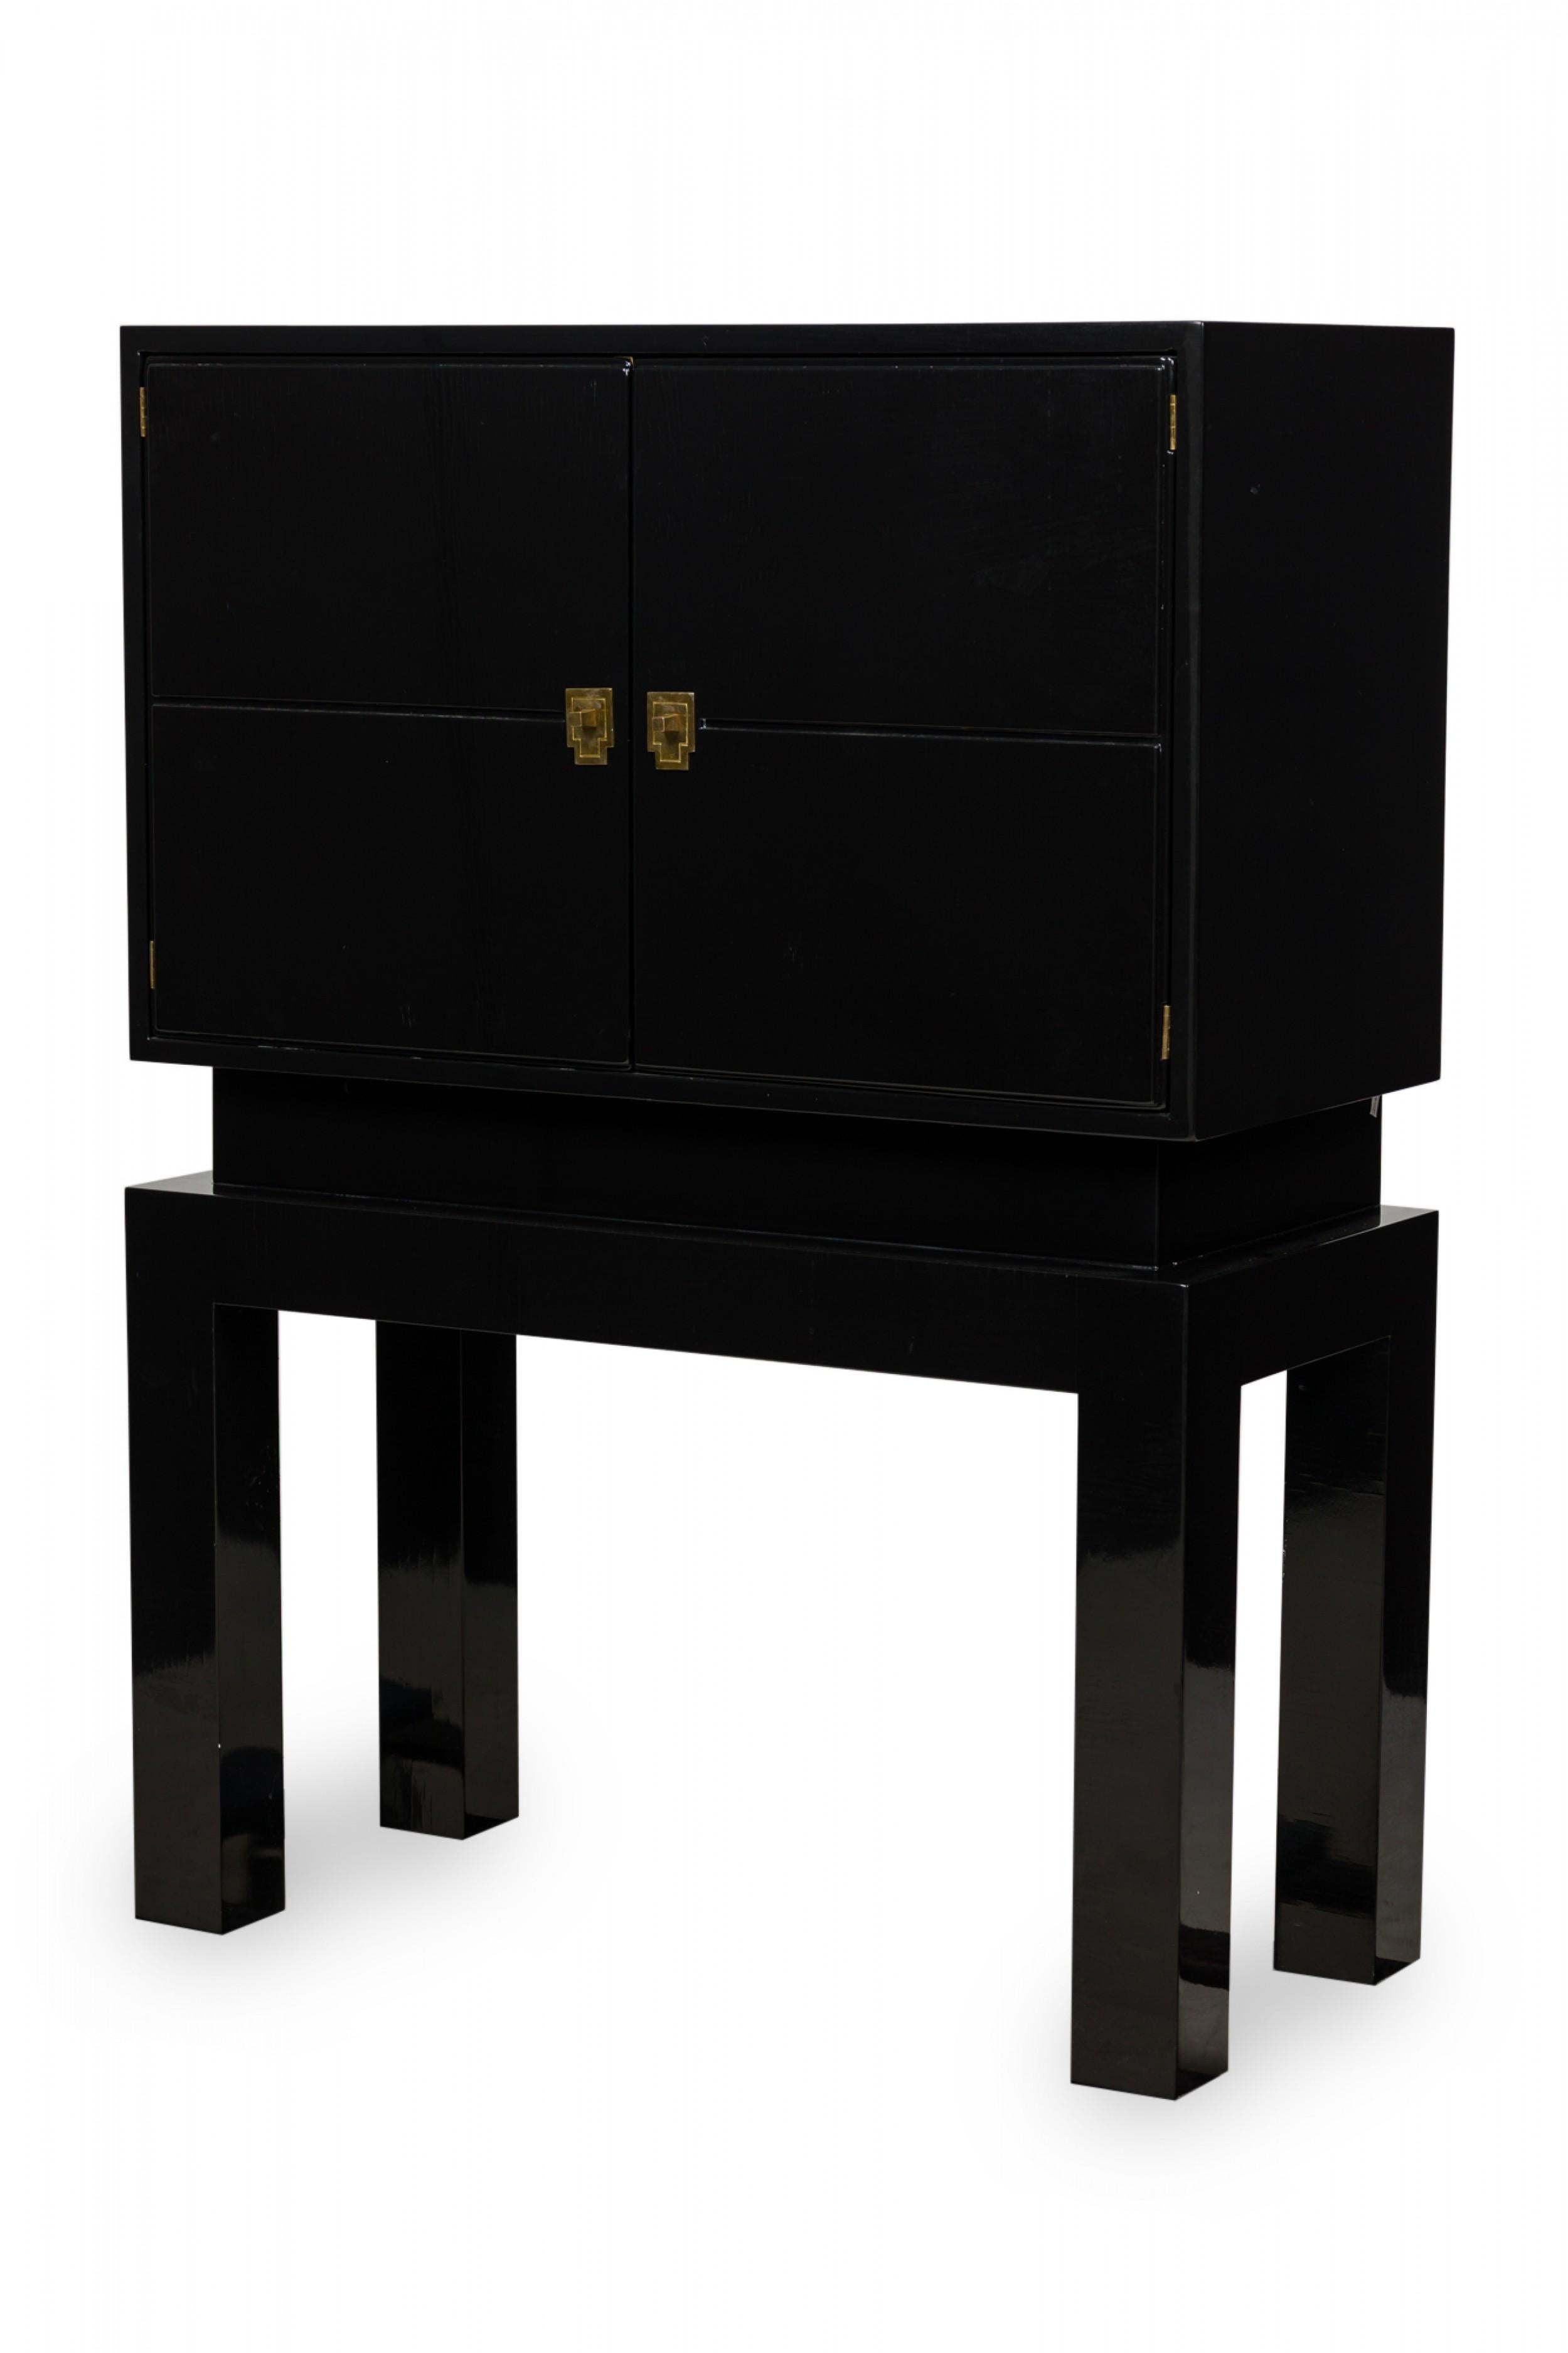 Tommi Parzinger midcentury (1970s) American Modern black lacquered rectangular bar cabinet in a Brutalist form features 2 hinged doors (with stylized bronze pulls) opening to reveal a 2-shelved storage compartment, standing on 4-legged block frame.